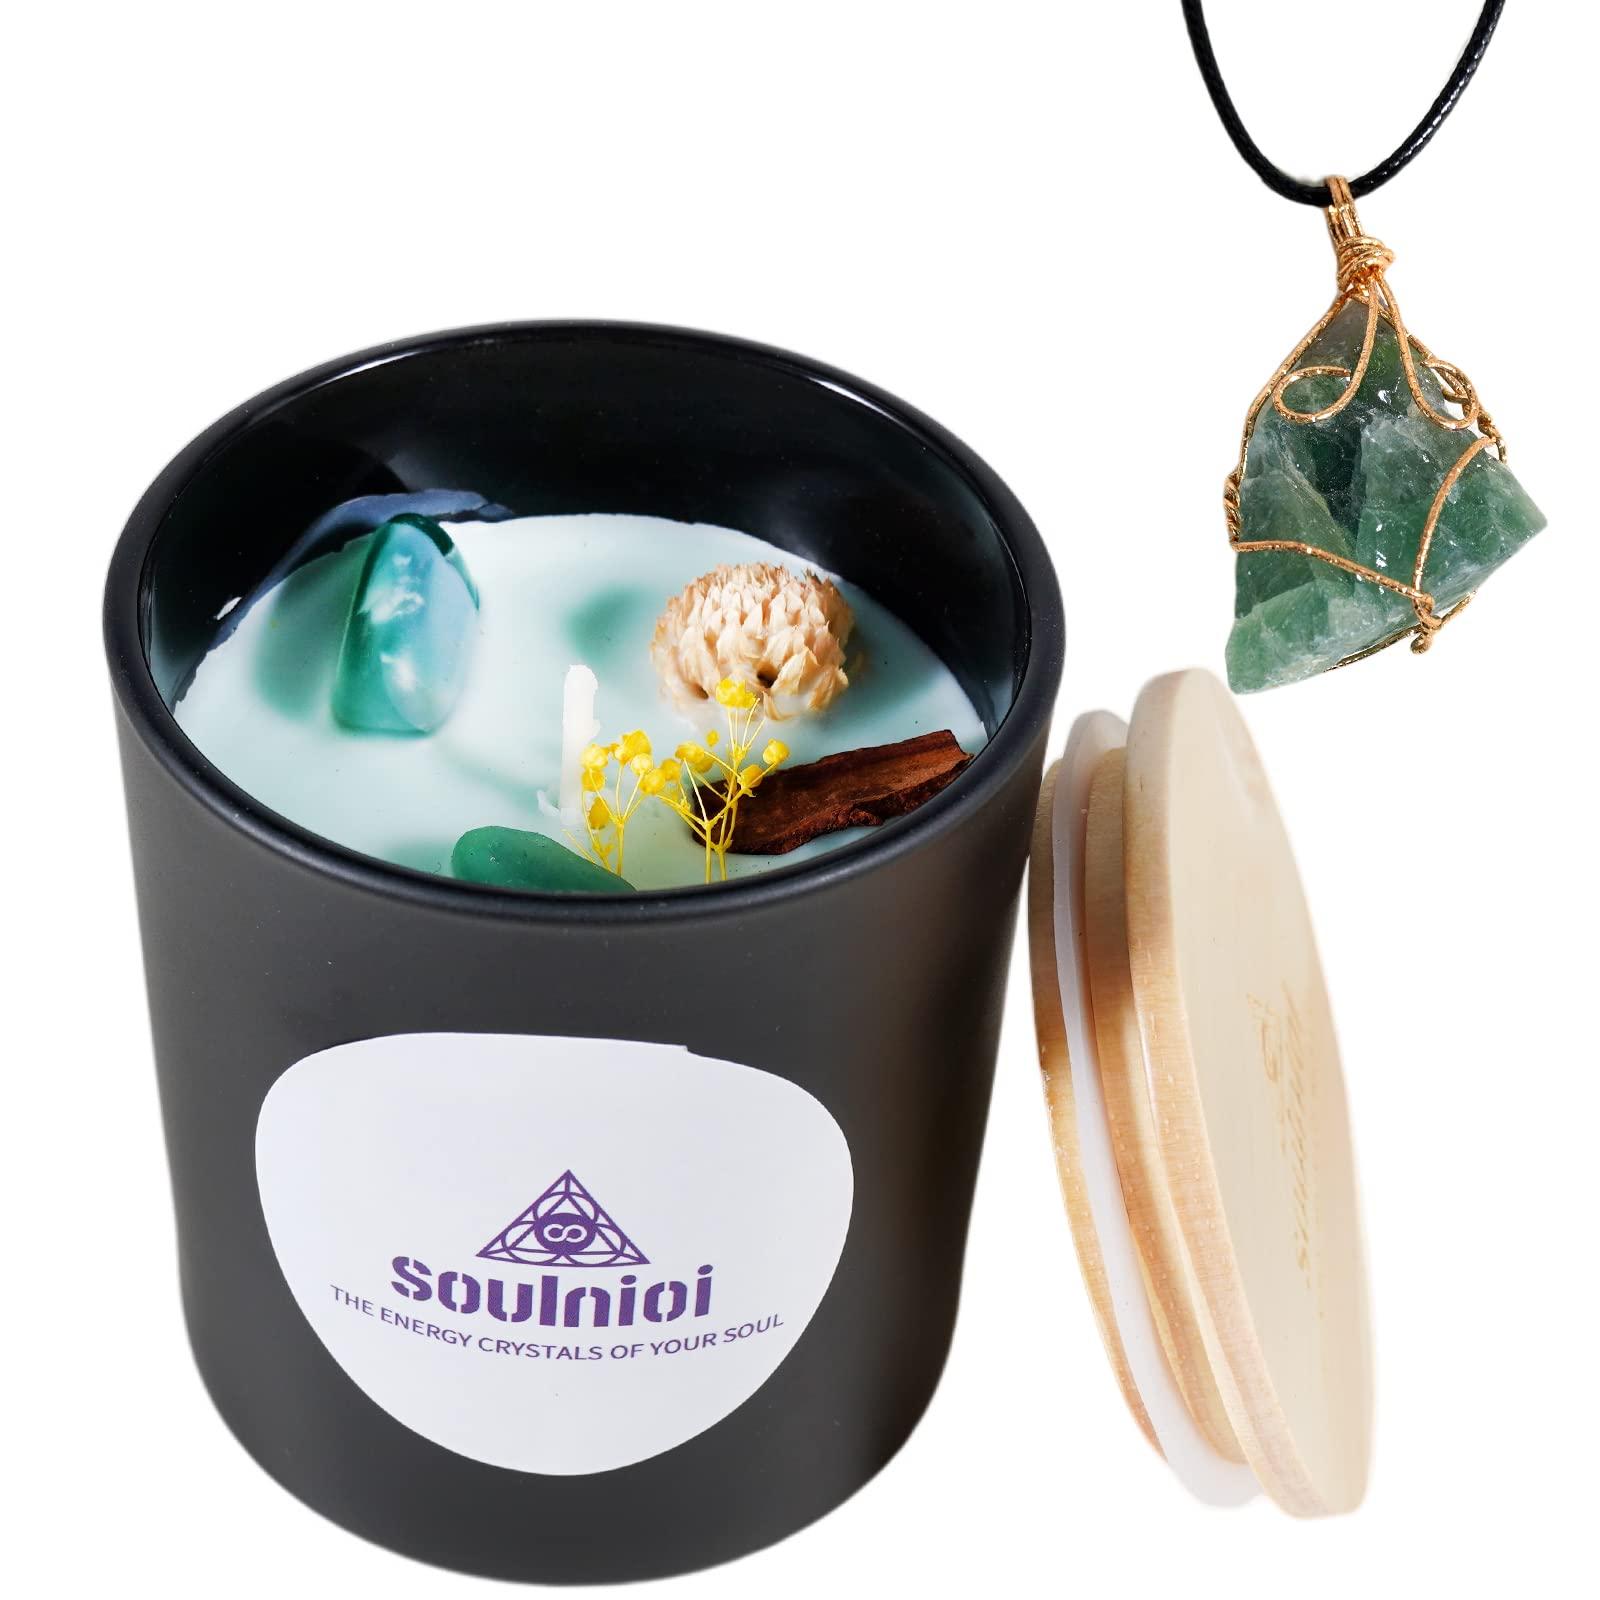 Soulnioi Scented Candle Set Black Cup Soy Wax Aromatherapy Candle with Crystal and Dry Flower Freesia Fragrance and Fluorite Crystal Pendant Necklace of Stress Realxtion for Wedding Birthday Gift